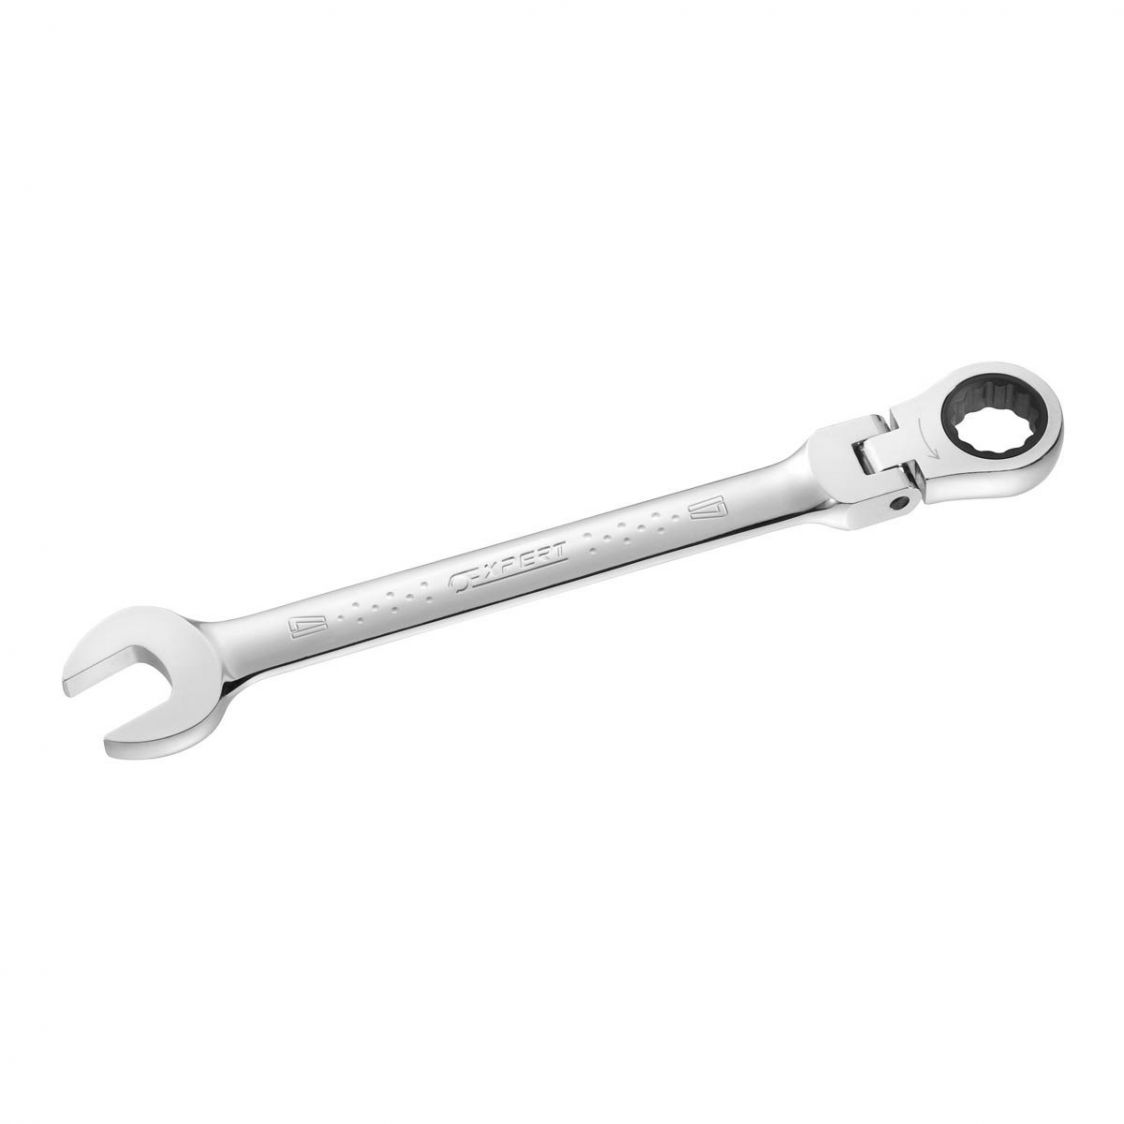 EXPERT by FACOM E110903 - 10mm Metric Hinged Ratchet Combination Spanner